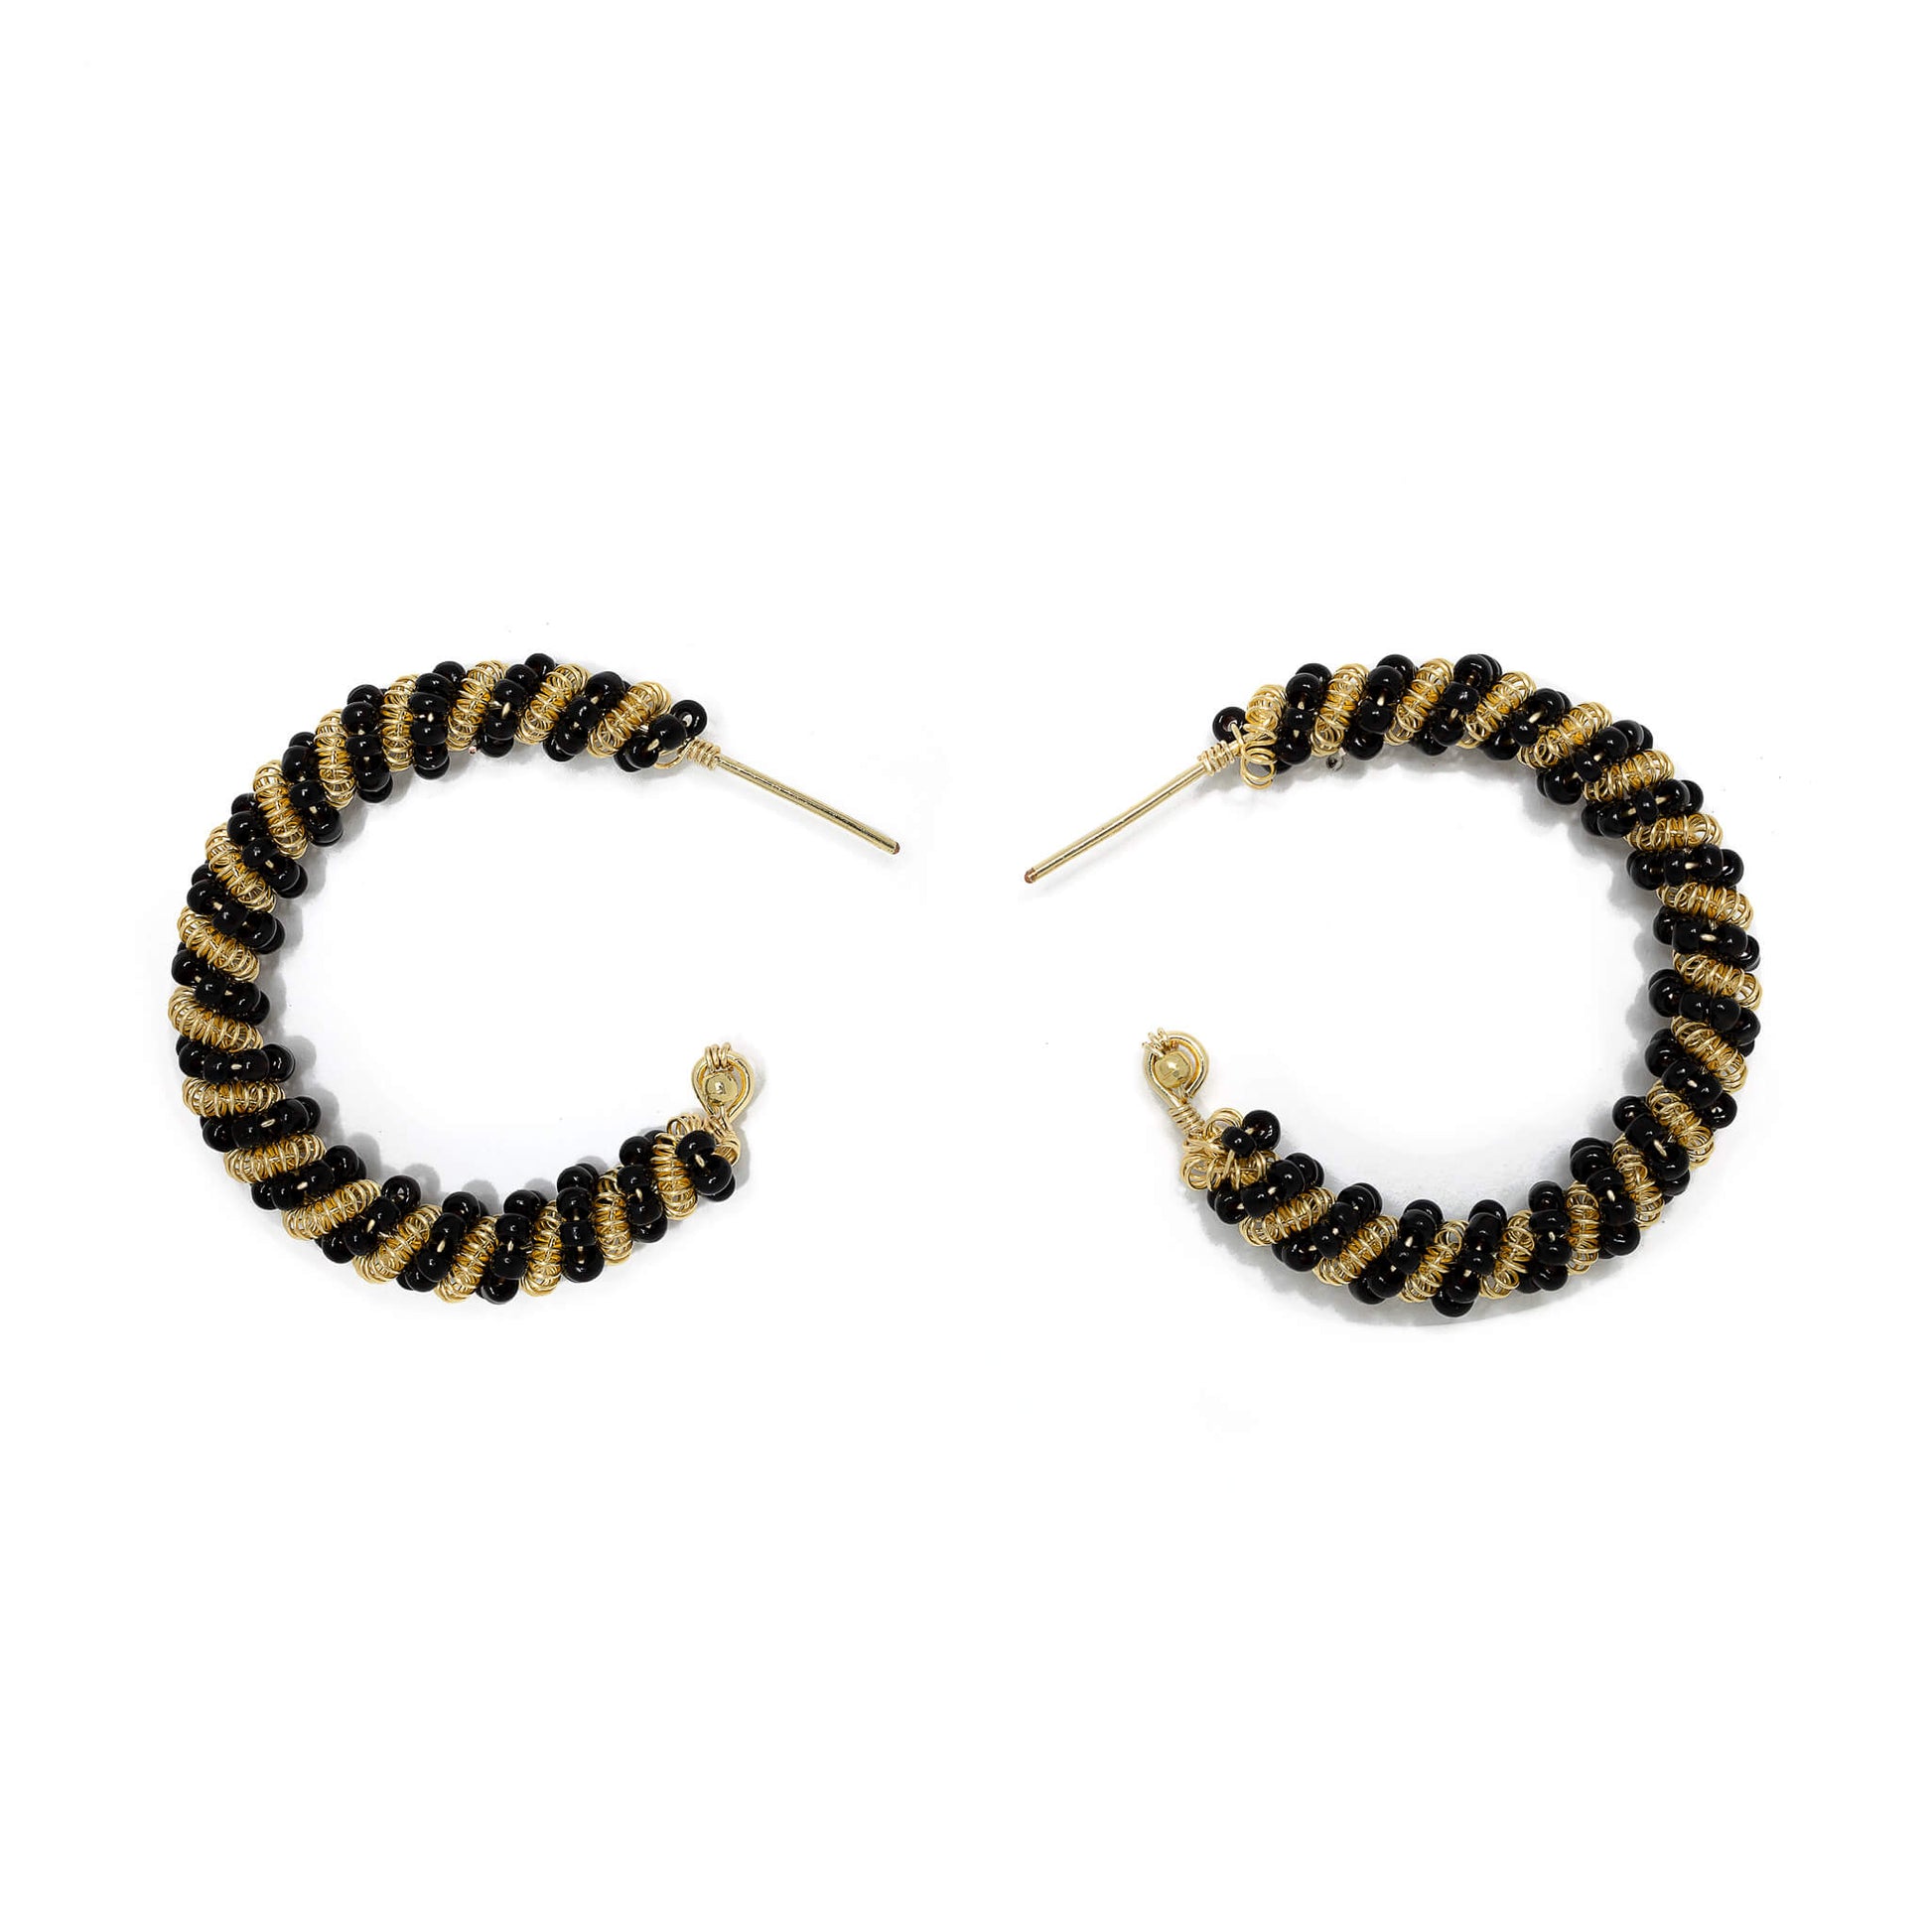 The Milan Hoop Earrings are 1.5 inches long. Minimalist Gold and black earrings. Wire Wrapped Earrings. Handmade Gold beaded earrings. Feature gold-plated wire and Czech seed bead crystals. Wire earrings.